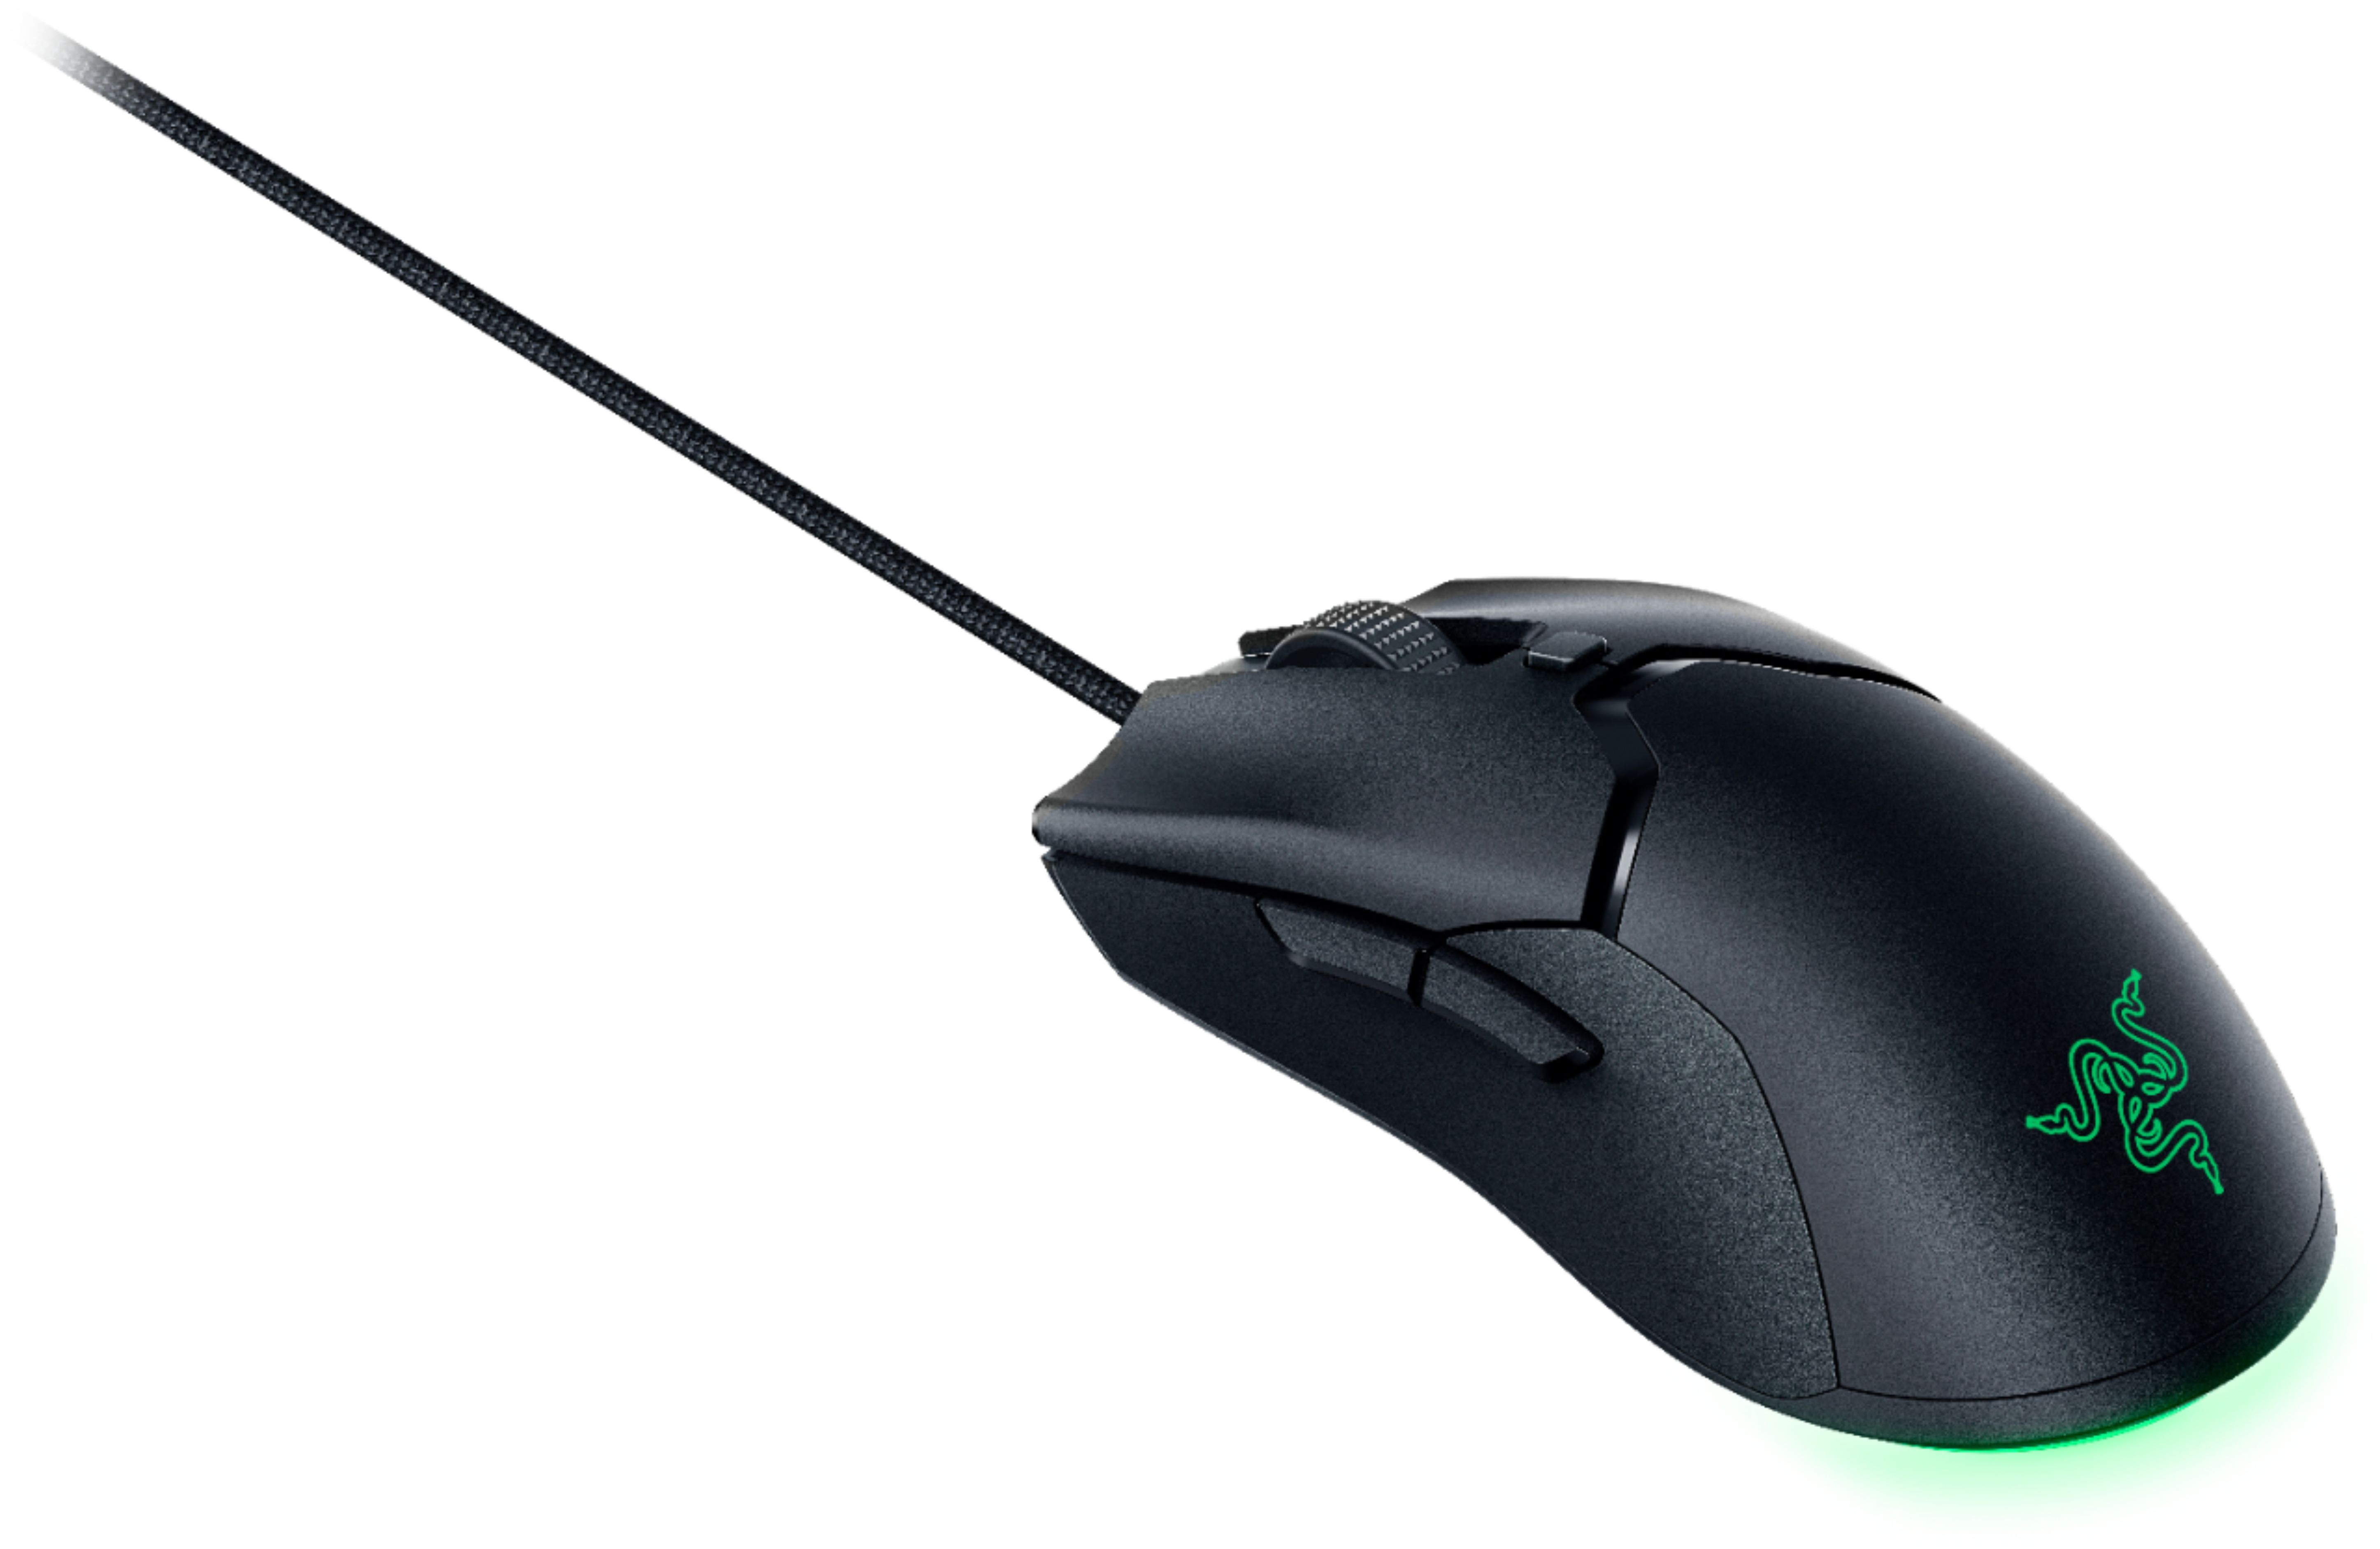 Razer Viper Mini Review - The Best Small Gaming Mouse